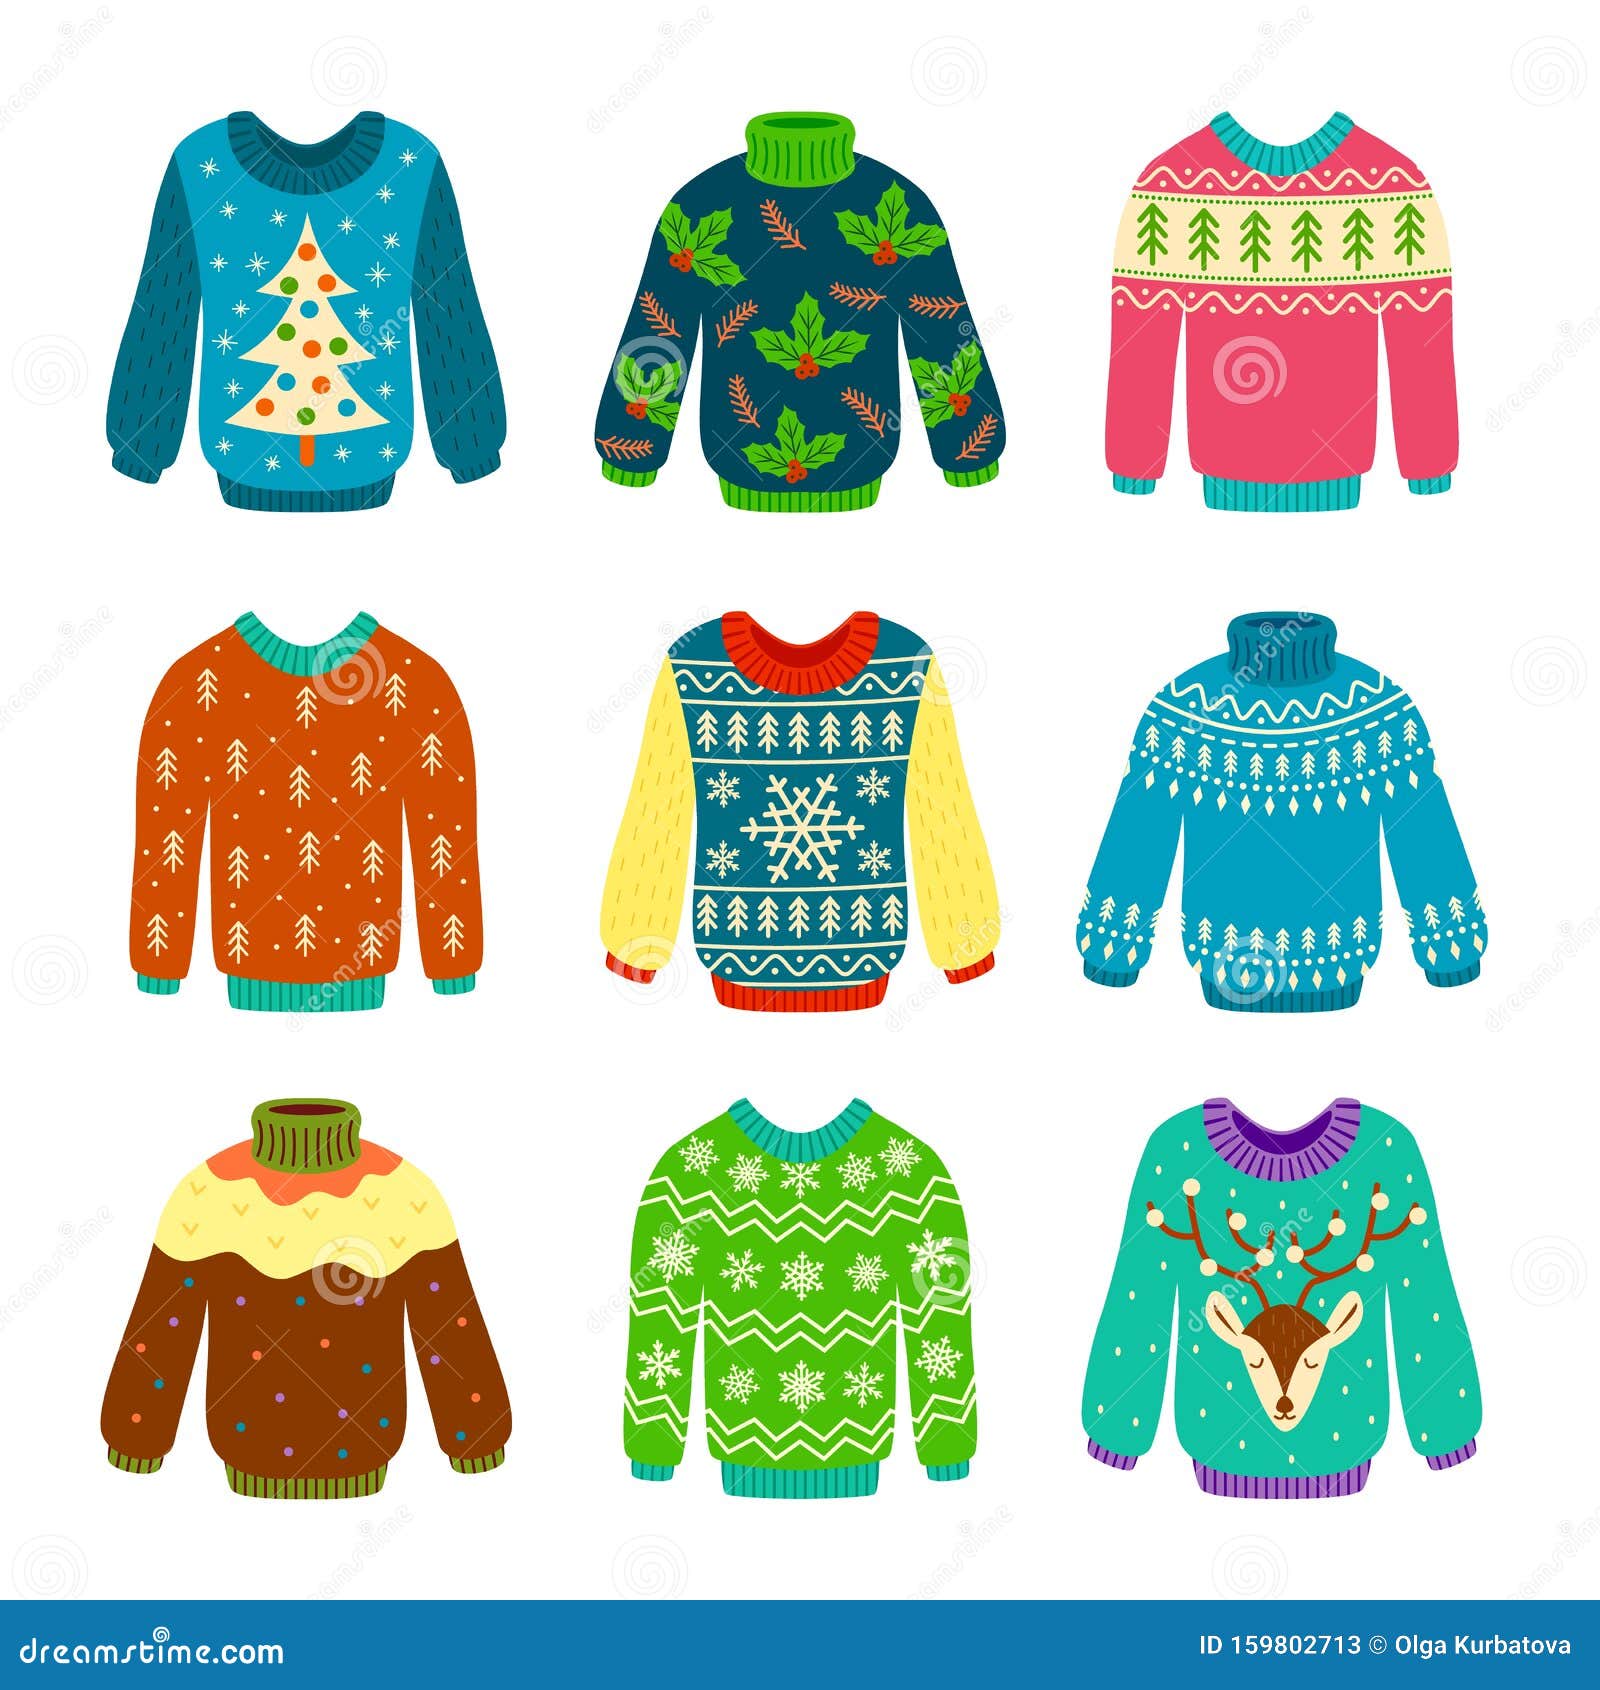 Ugly christmas sweater patterns stock illustrations â ugly christmas sweater patterns stock illustrations vectors clipart